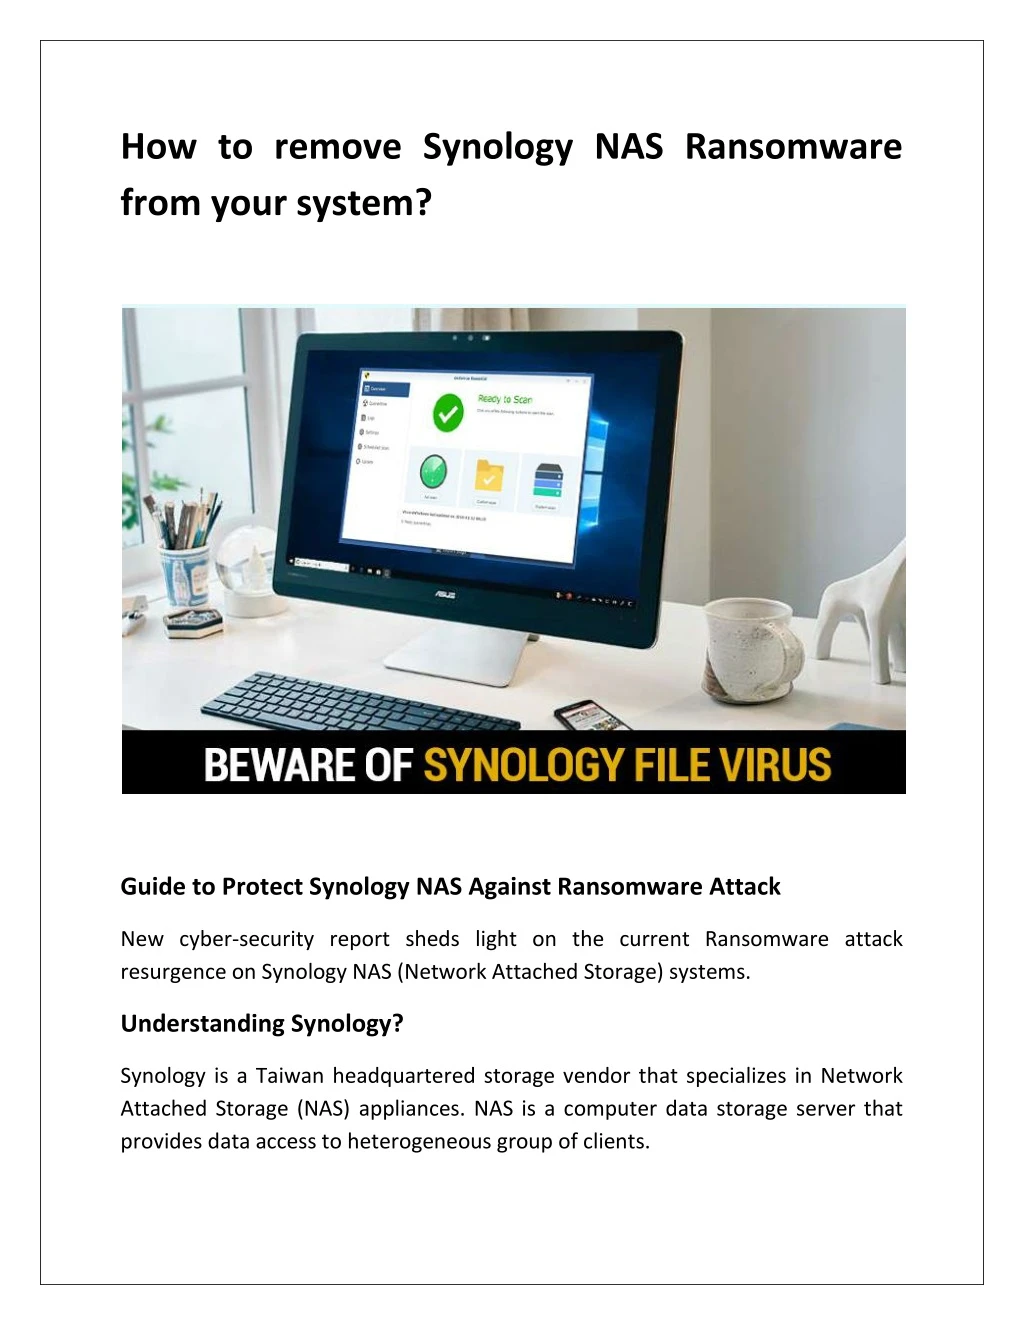 how to remove synology nas ransomware from your